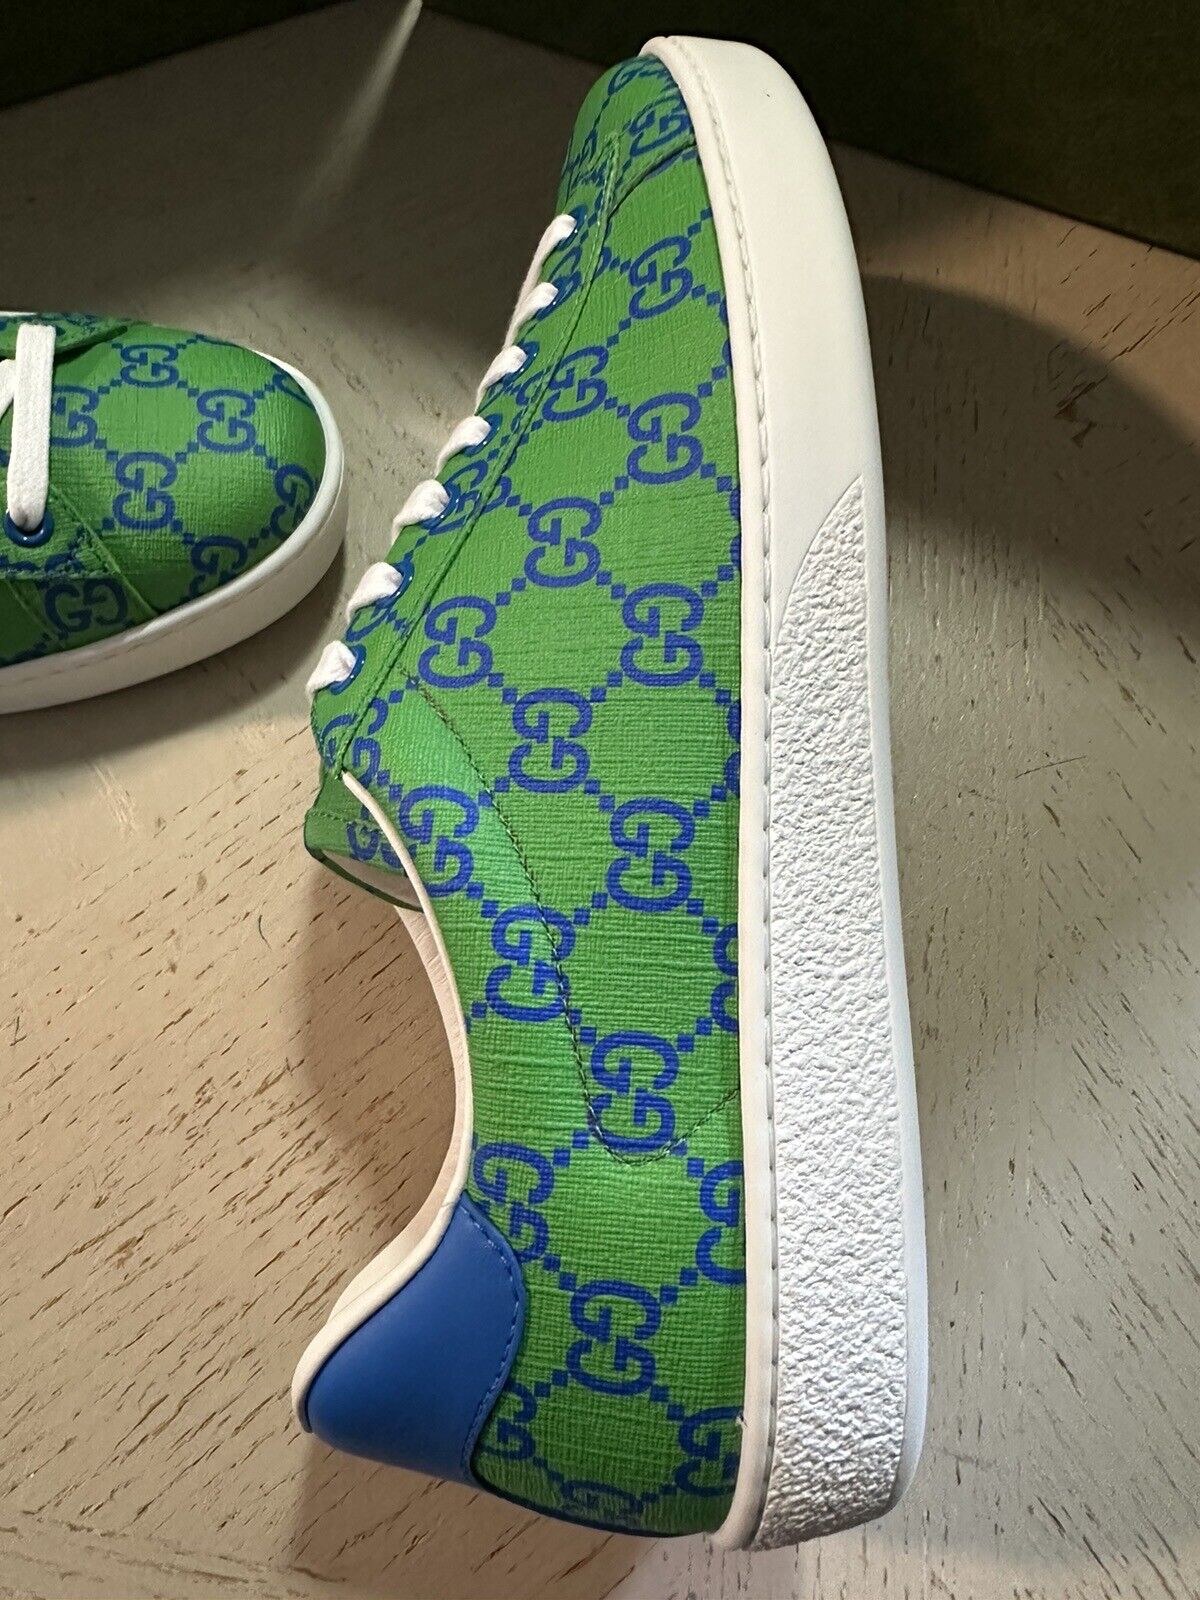 New Gucci Men’s GG Supreme Low Top Sneakers Green/Blue 9 US/8 UK 733631